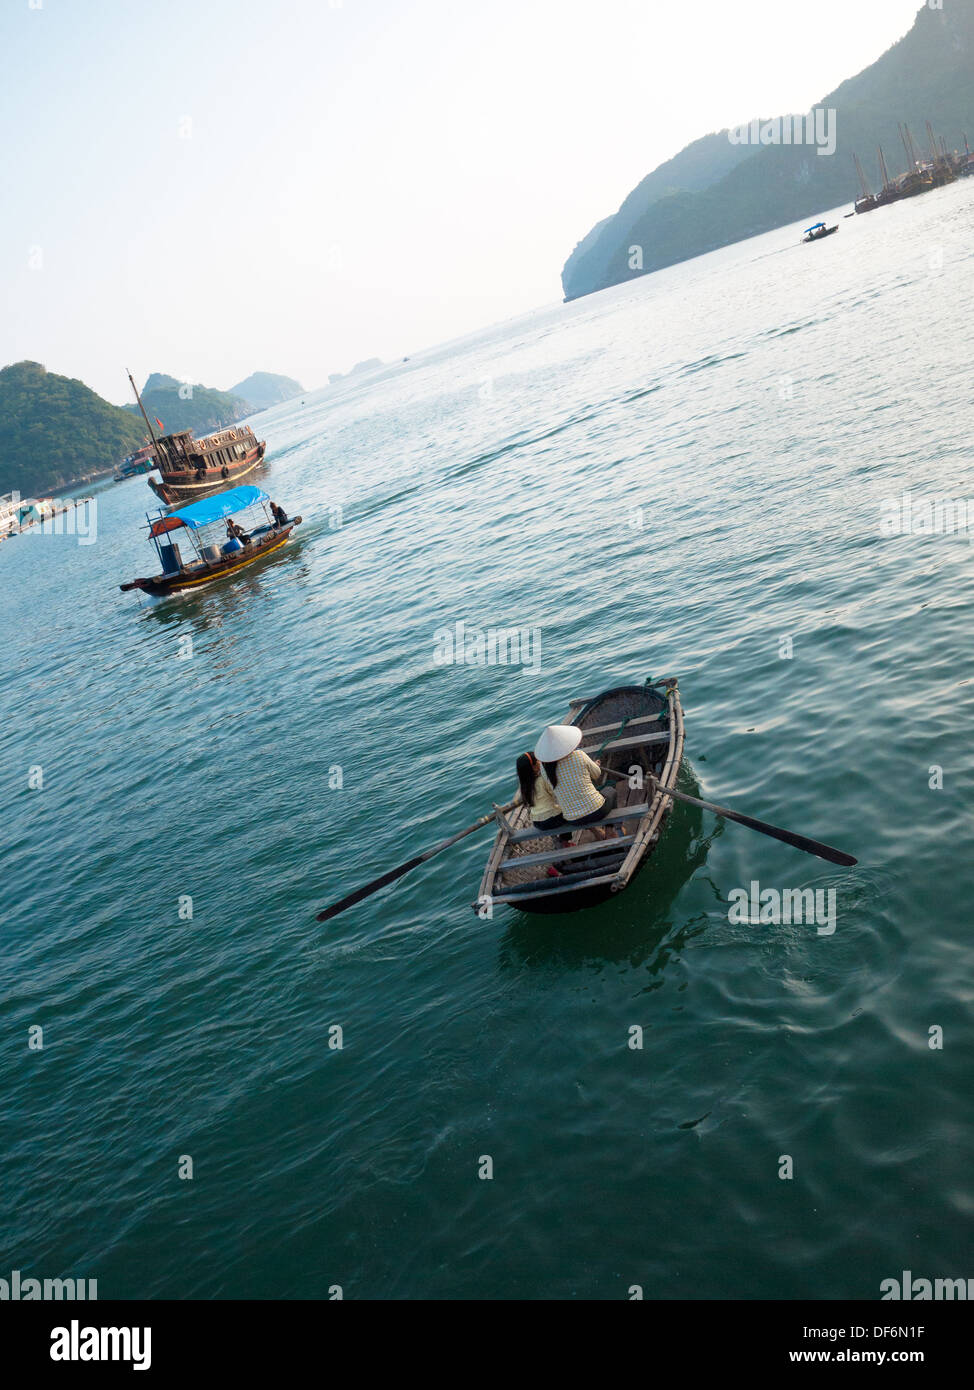 A Vietnamese woman in a conical hat and a Vietnamese girl in a rowboat off Cat Ba Island in Lan Ha Bay, Halong Bay, Vietnam. Stock Photo